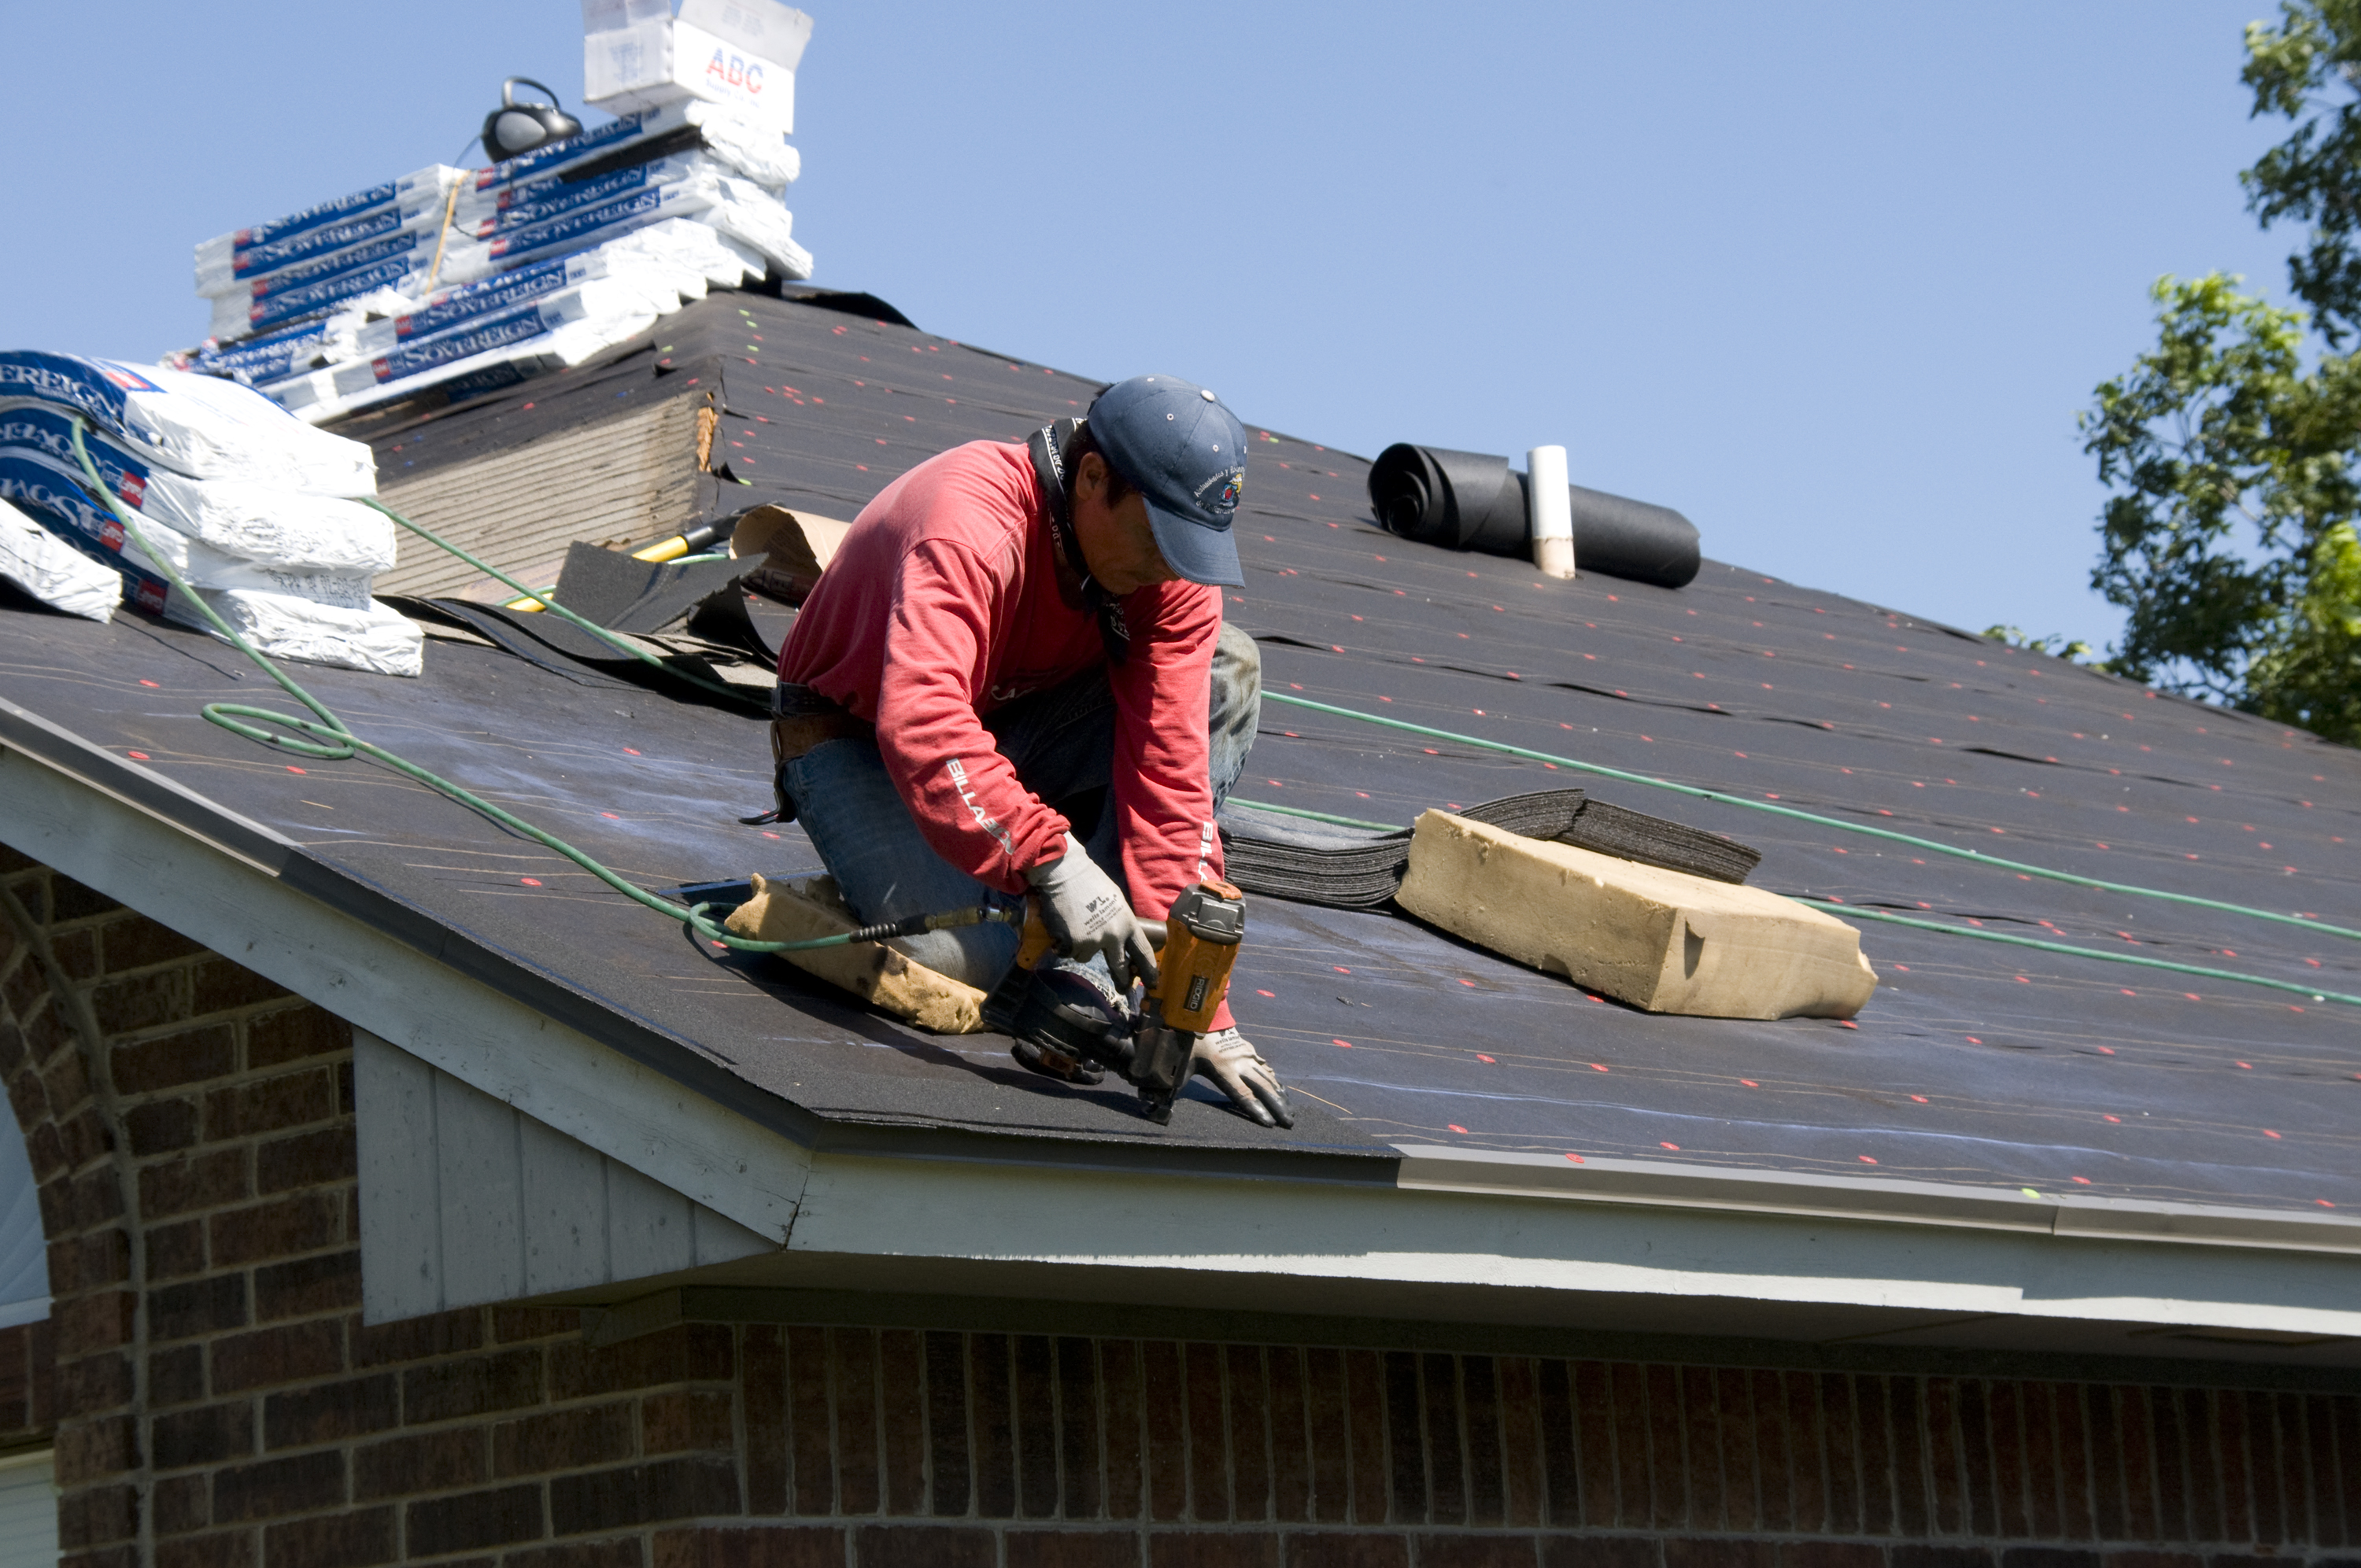 How to Ensure Your Roof is Ready Before Installing Solar Panels